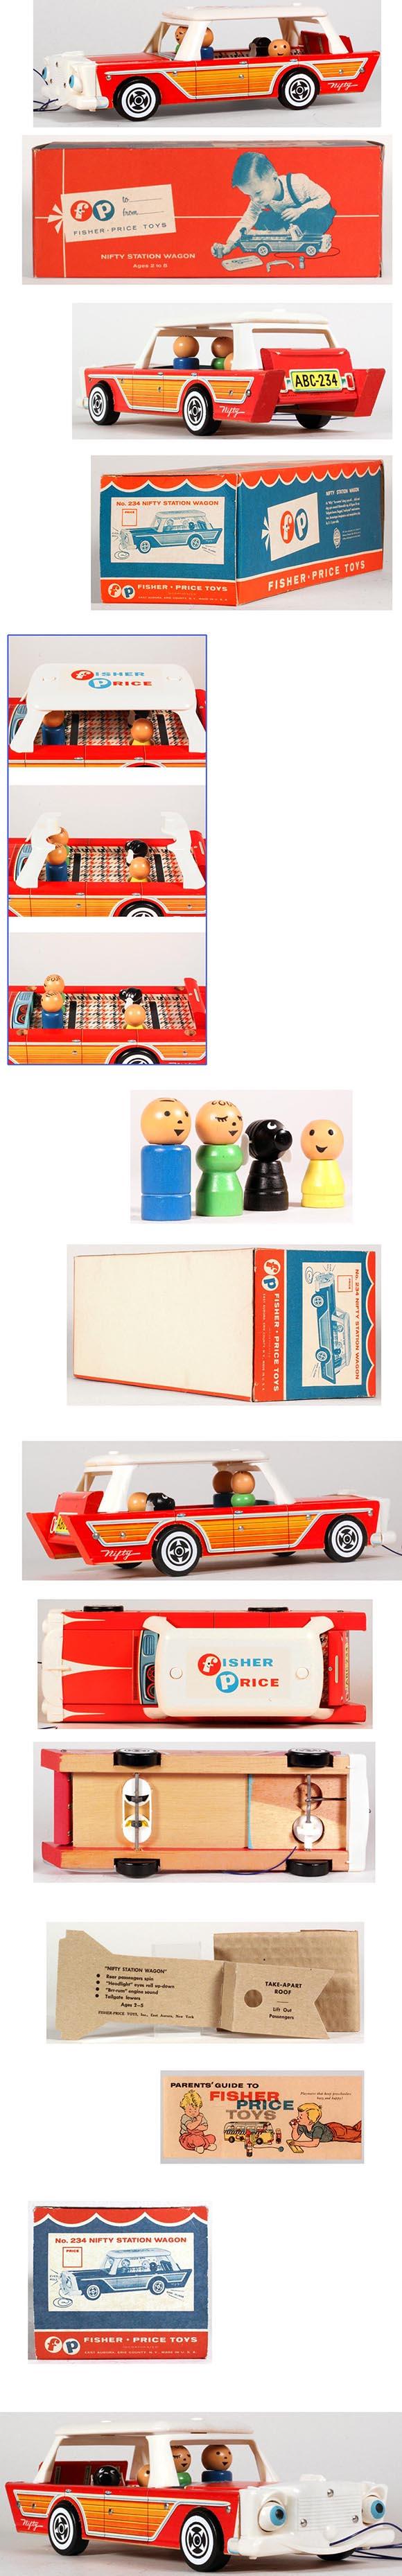 1960 Fisher-Price #234 Nifty Station Wagon in Original Box